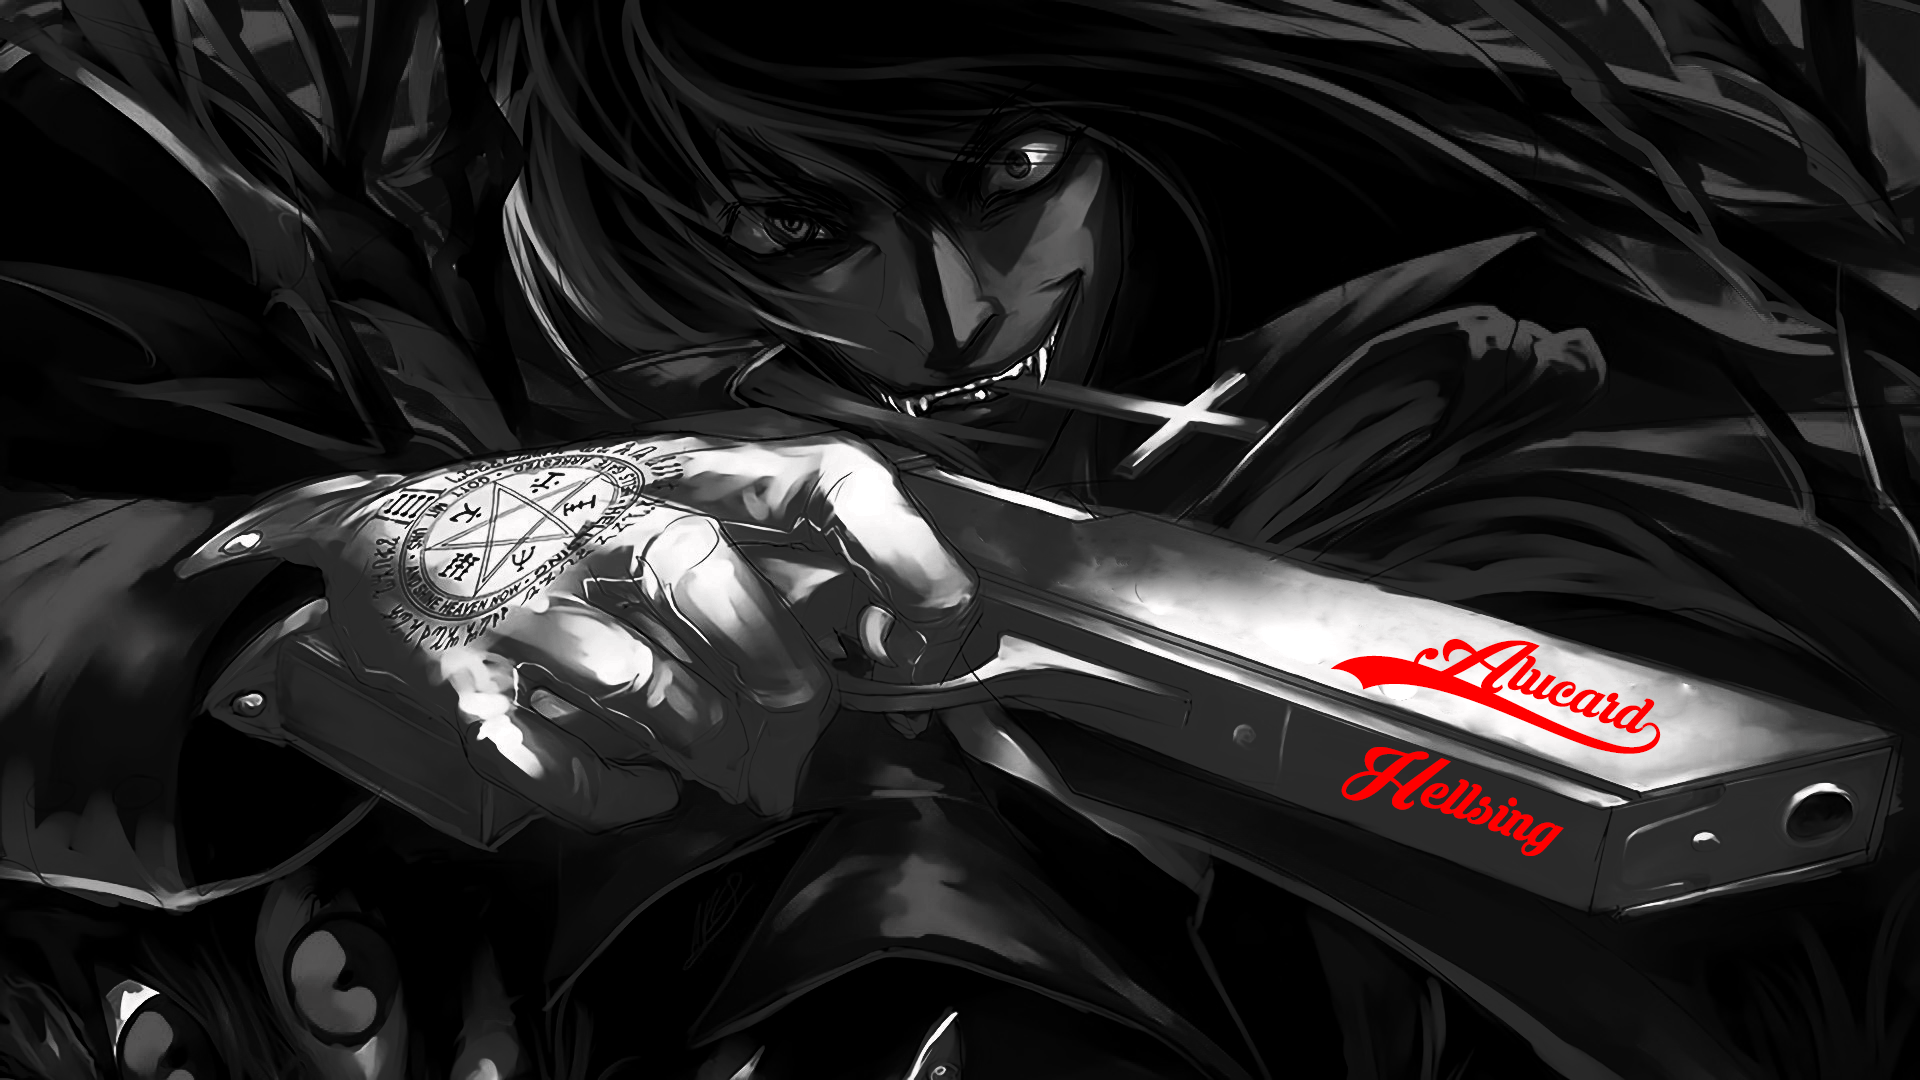 Alucard Black and White HD Wallpaper | Background Image | 1920x1080